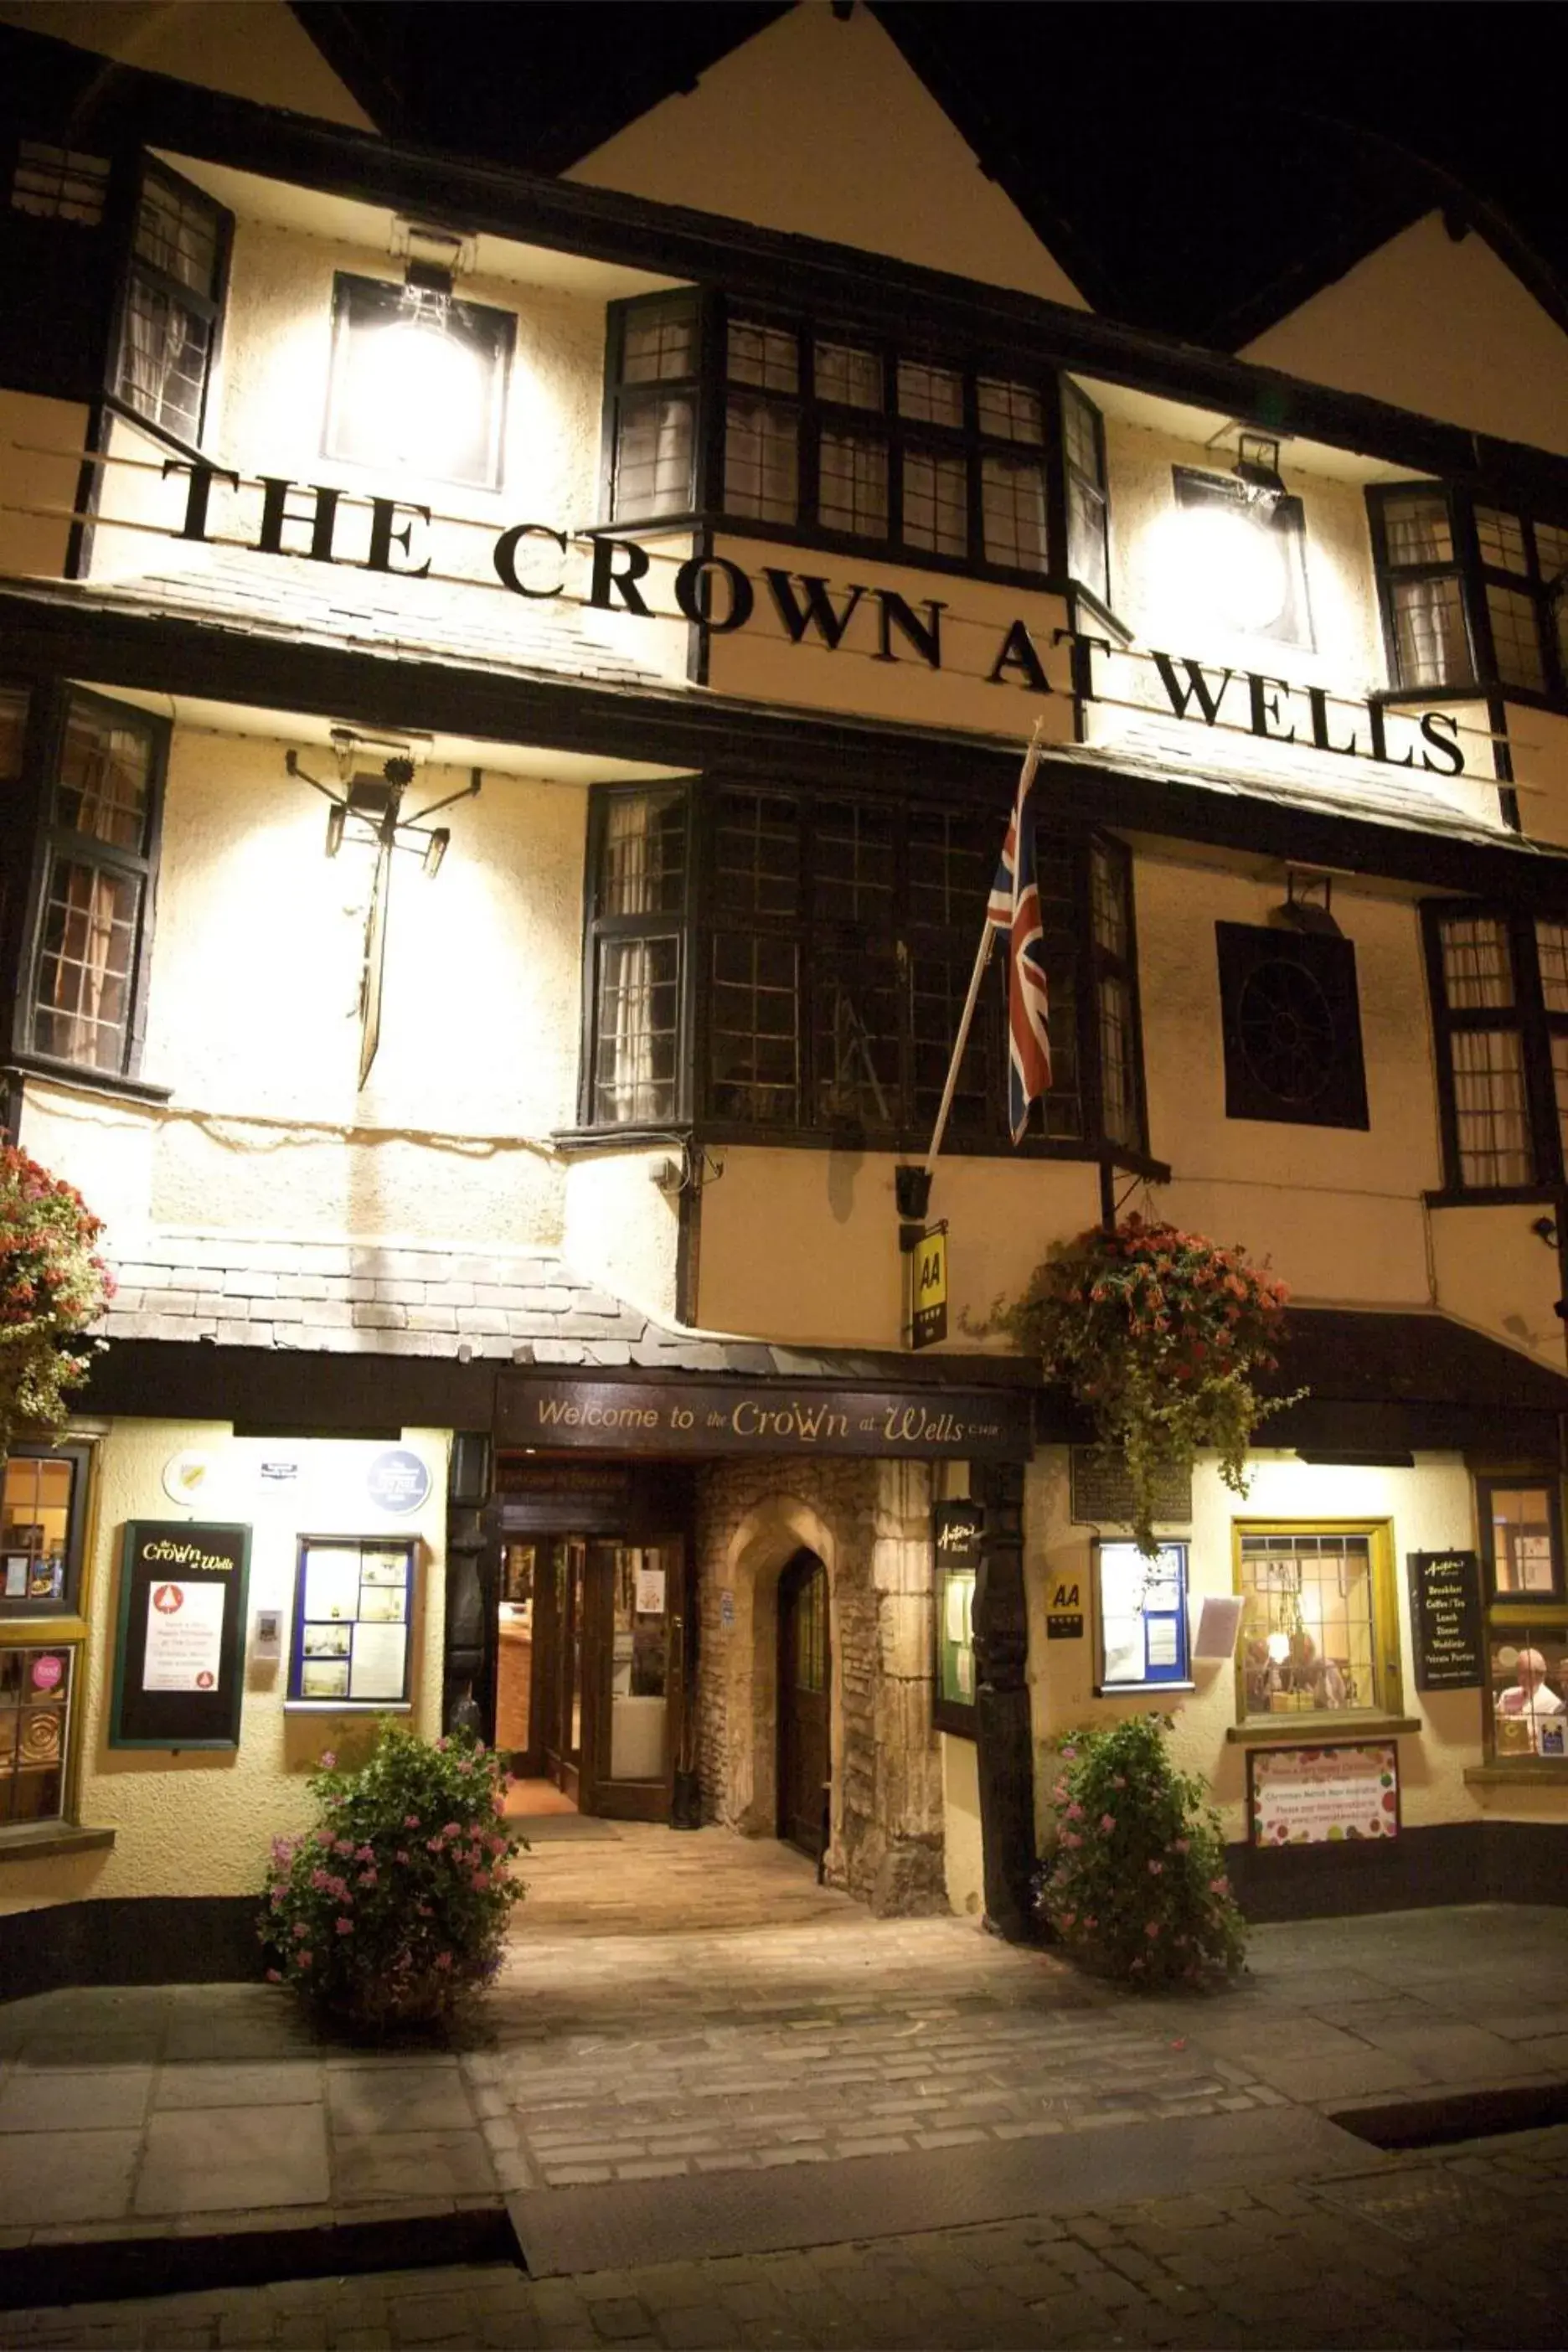 Property Building in The Crown at Wells, Somerset